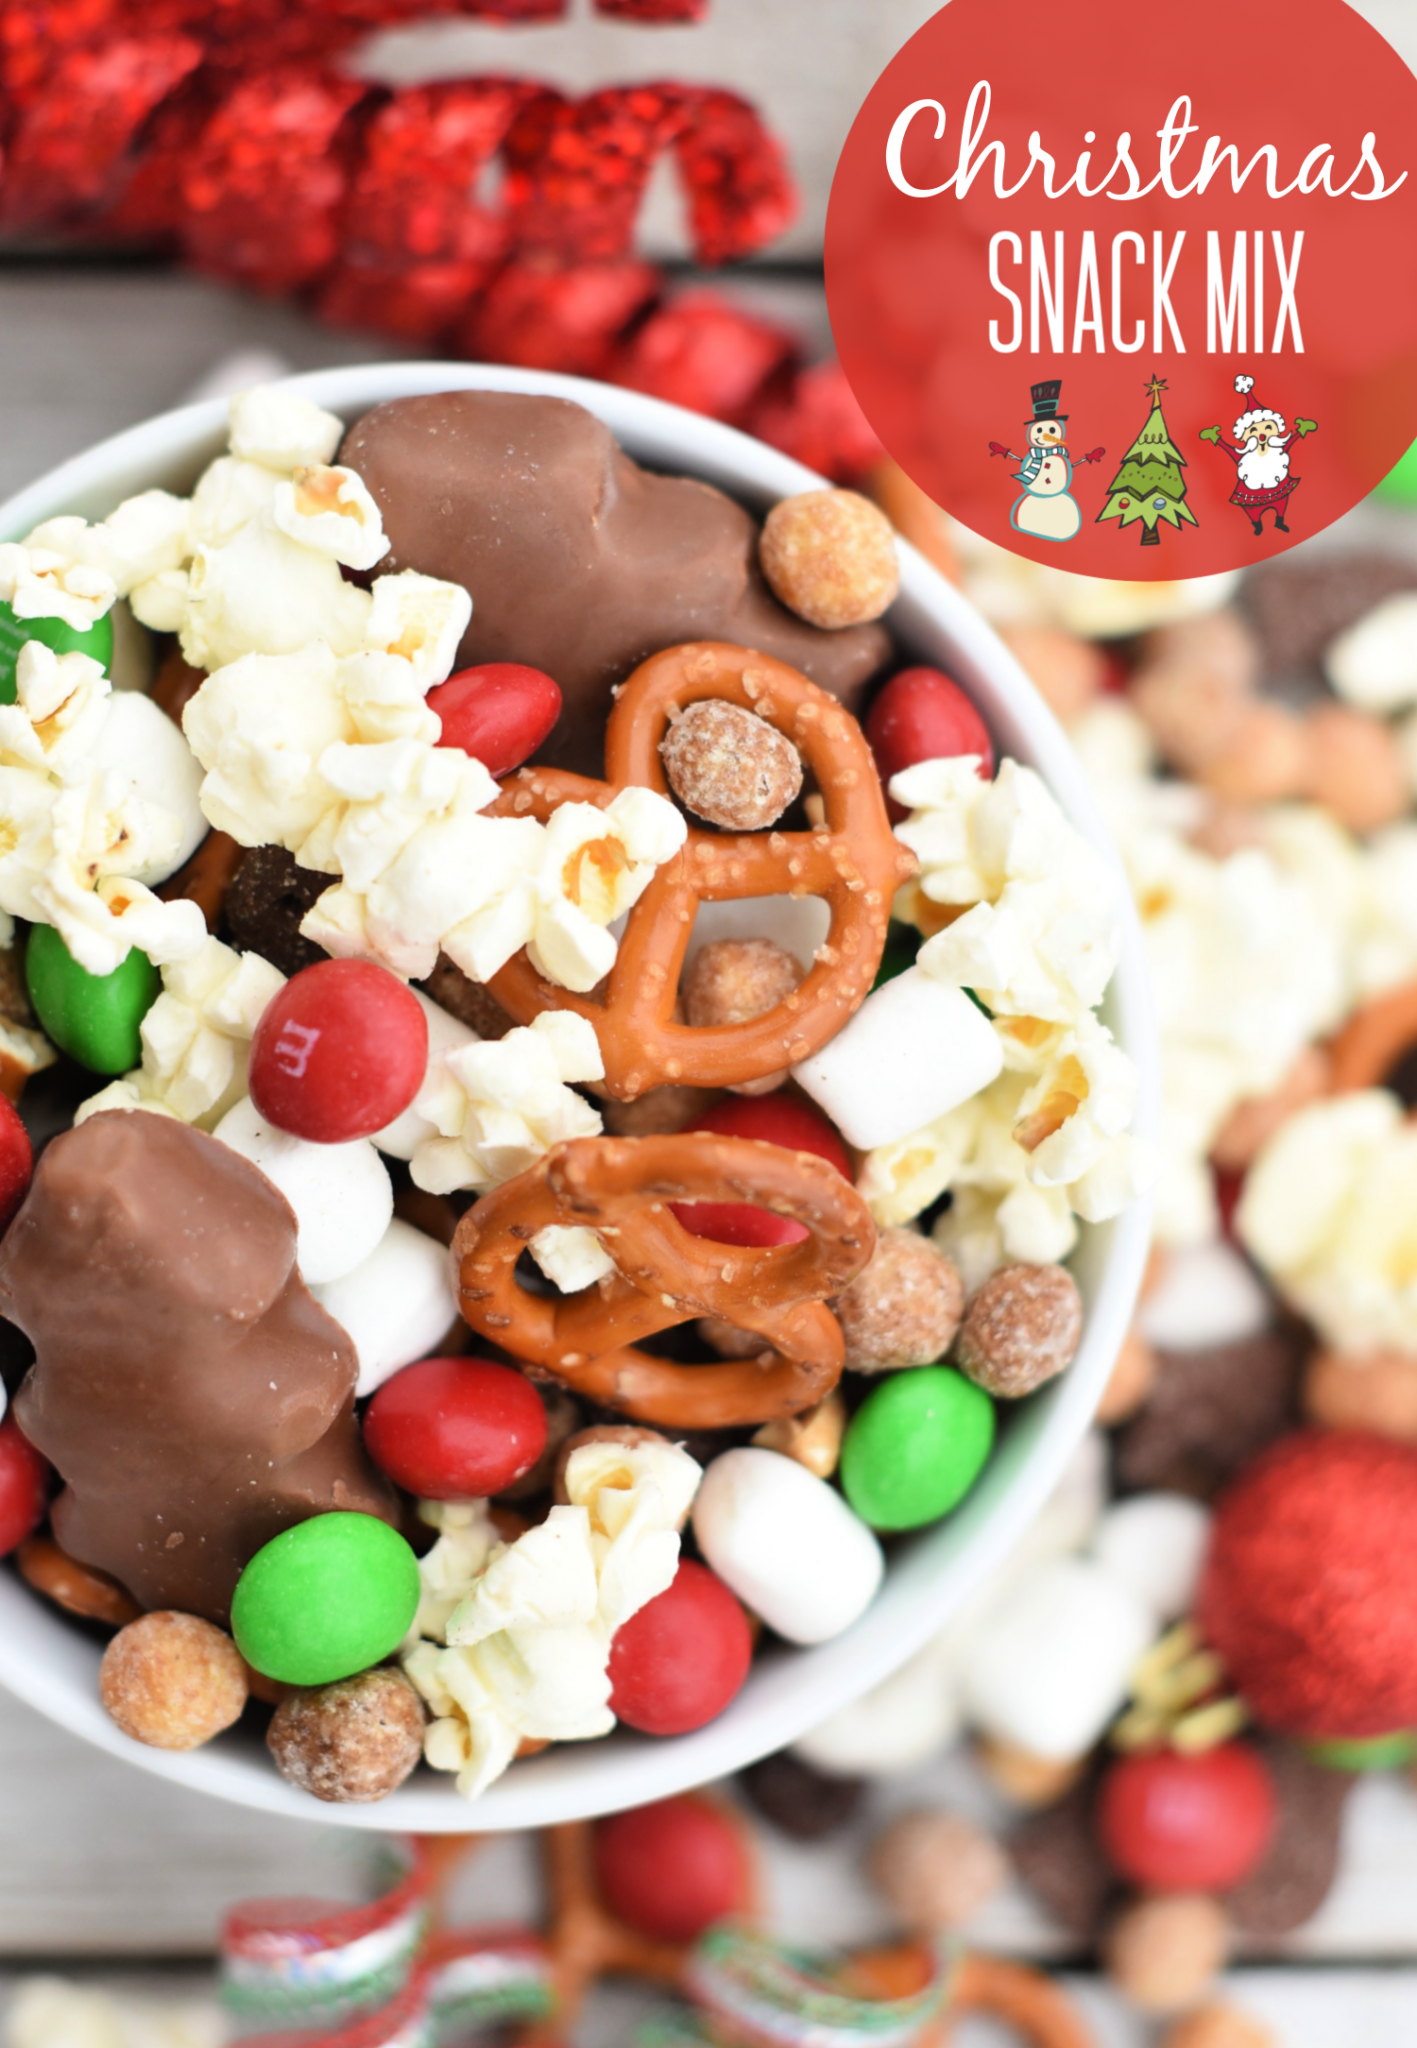 Christmas Snack Mix-This easy to make holiday snack mix is perfect for holiday parties, movie nights, or to take as a gift to friends!